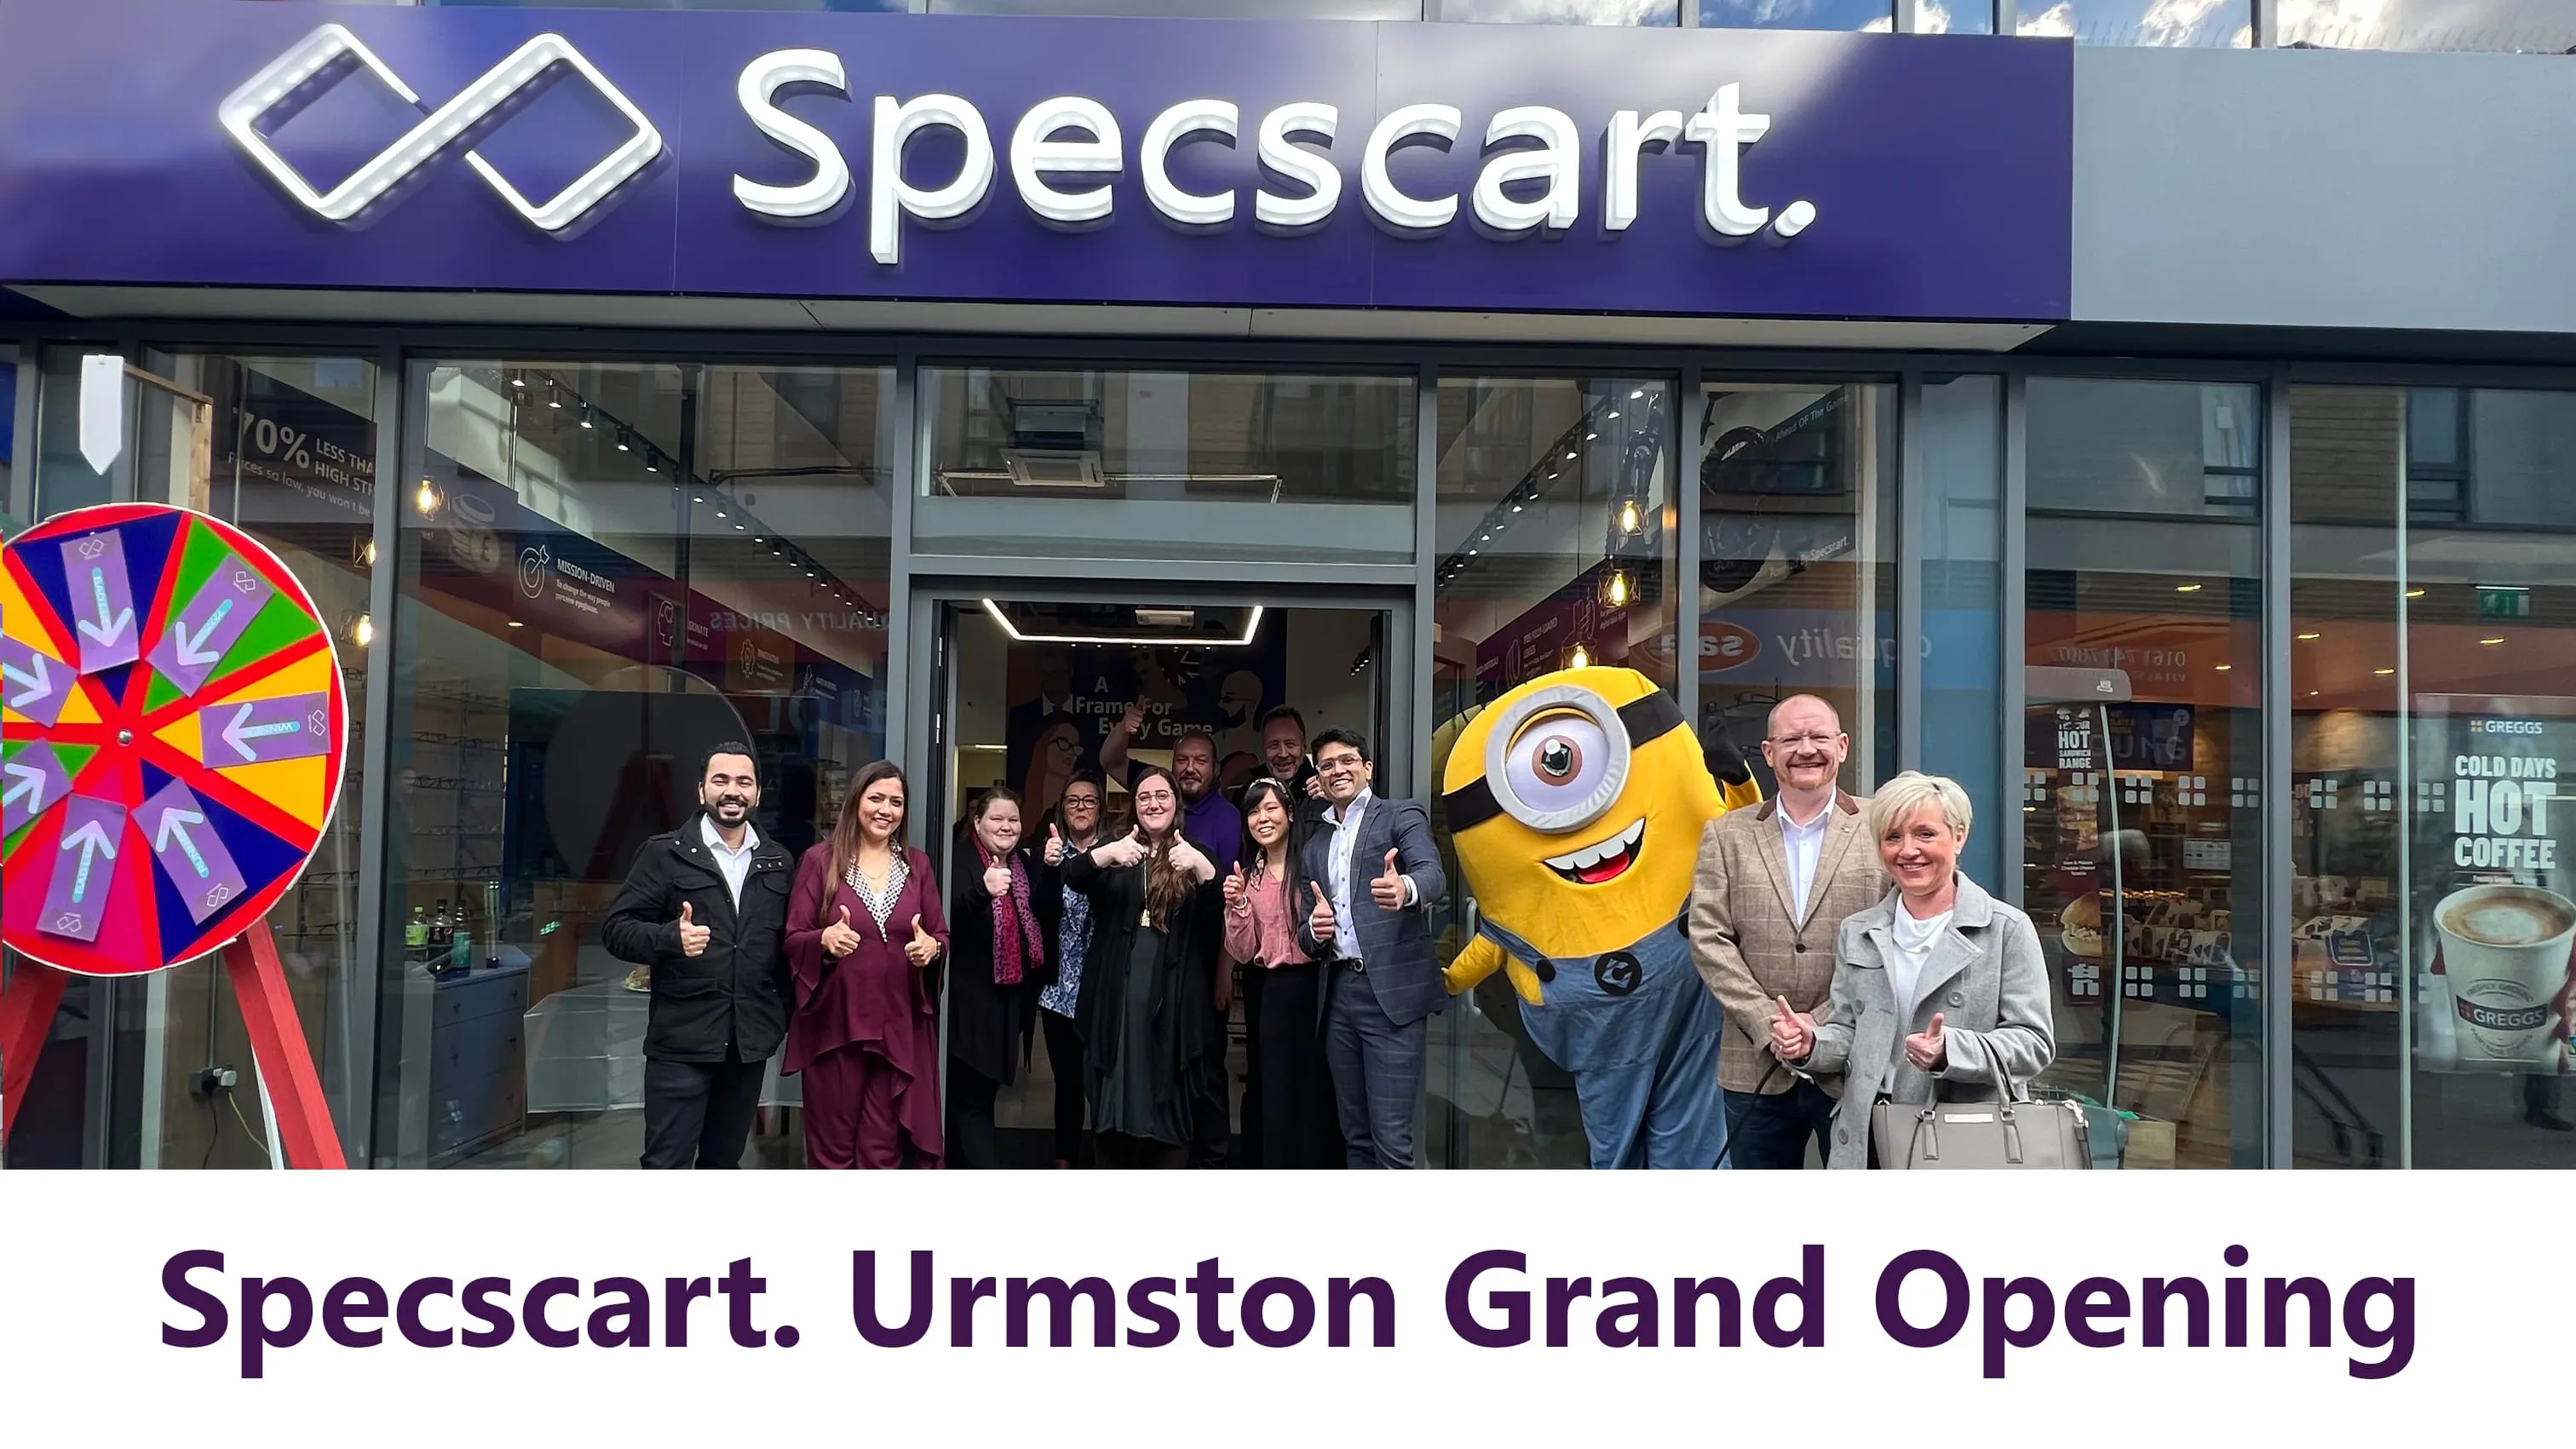 Specscart’s hattrick at Urmston on 5th March 2022